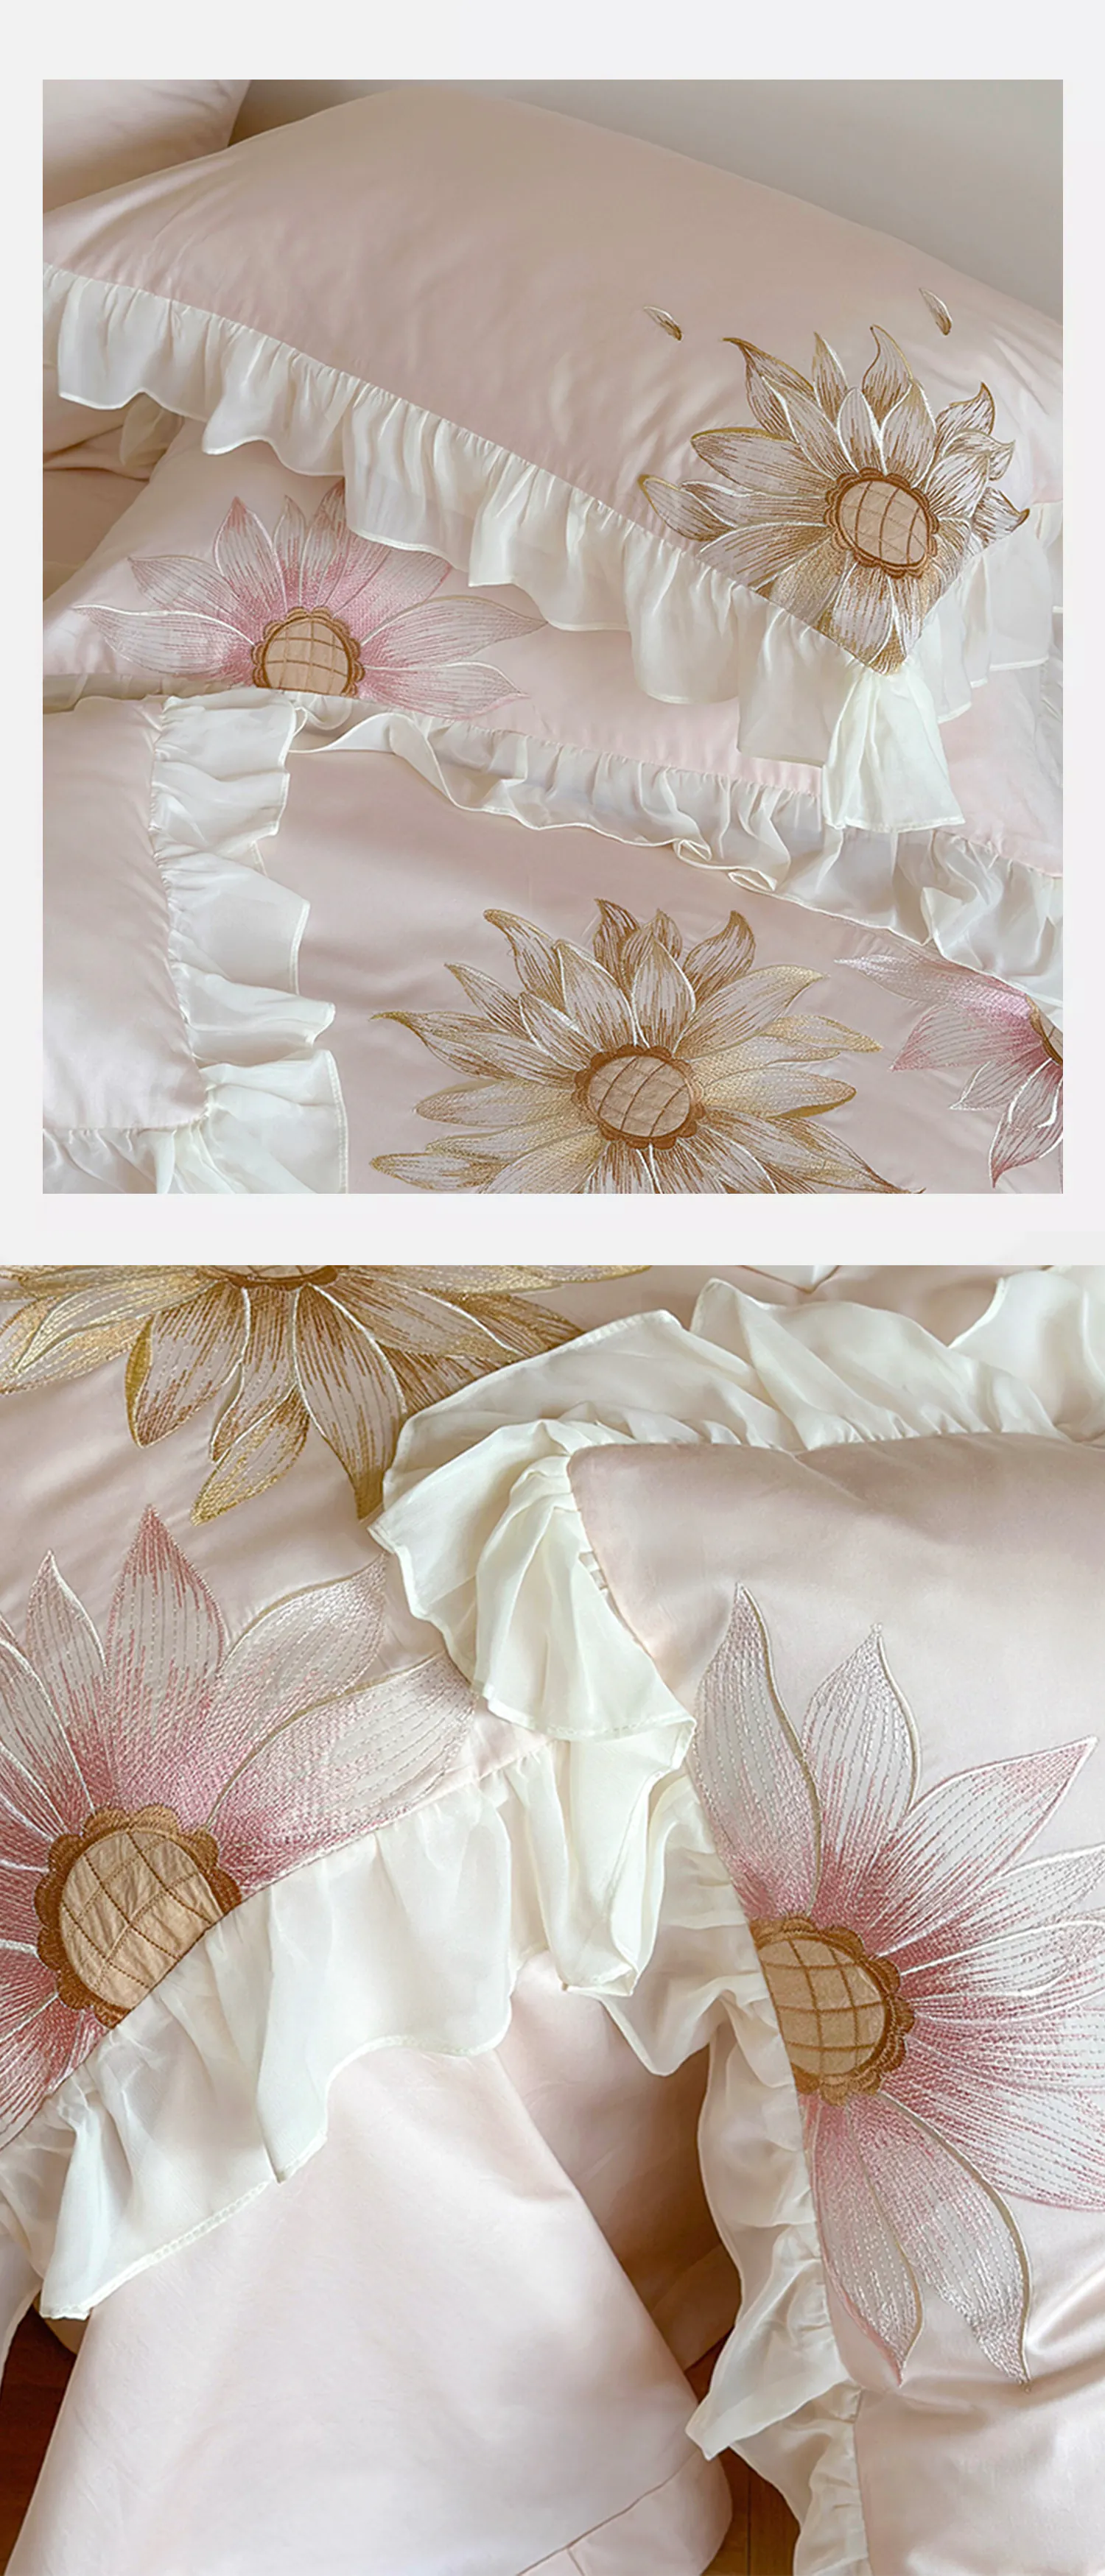 Soft-100-Egypt-Cotton-Embroidery-Ruffle-Bedding-Set-with-Sunflower18